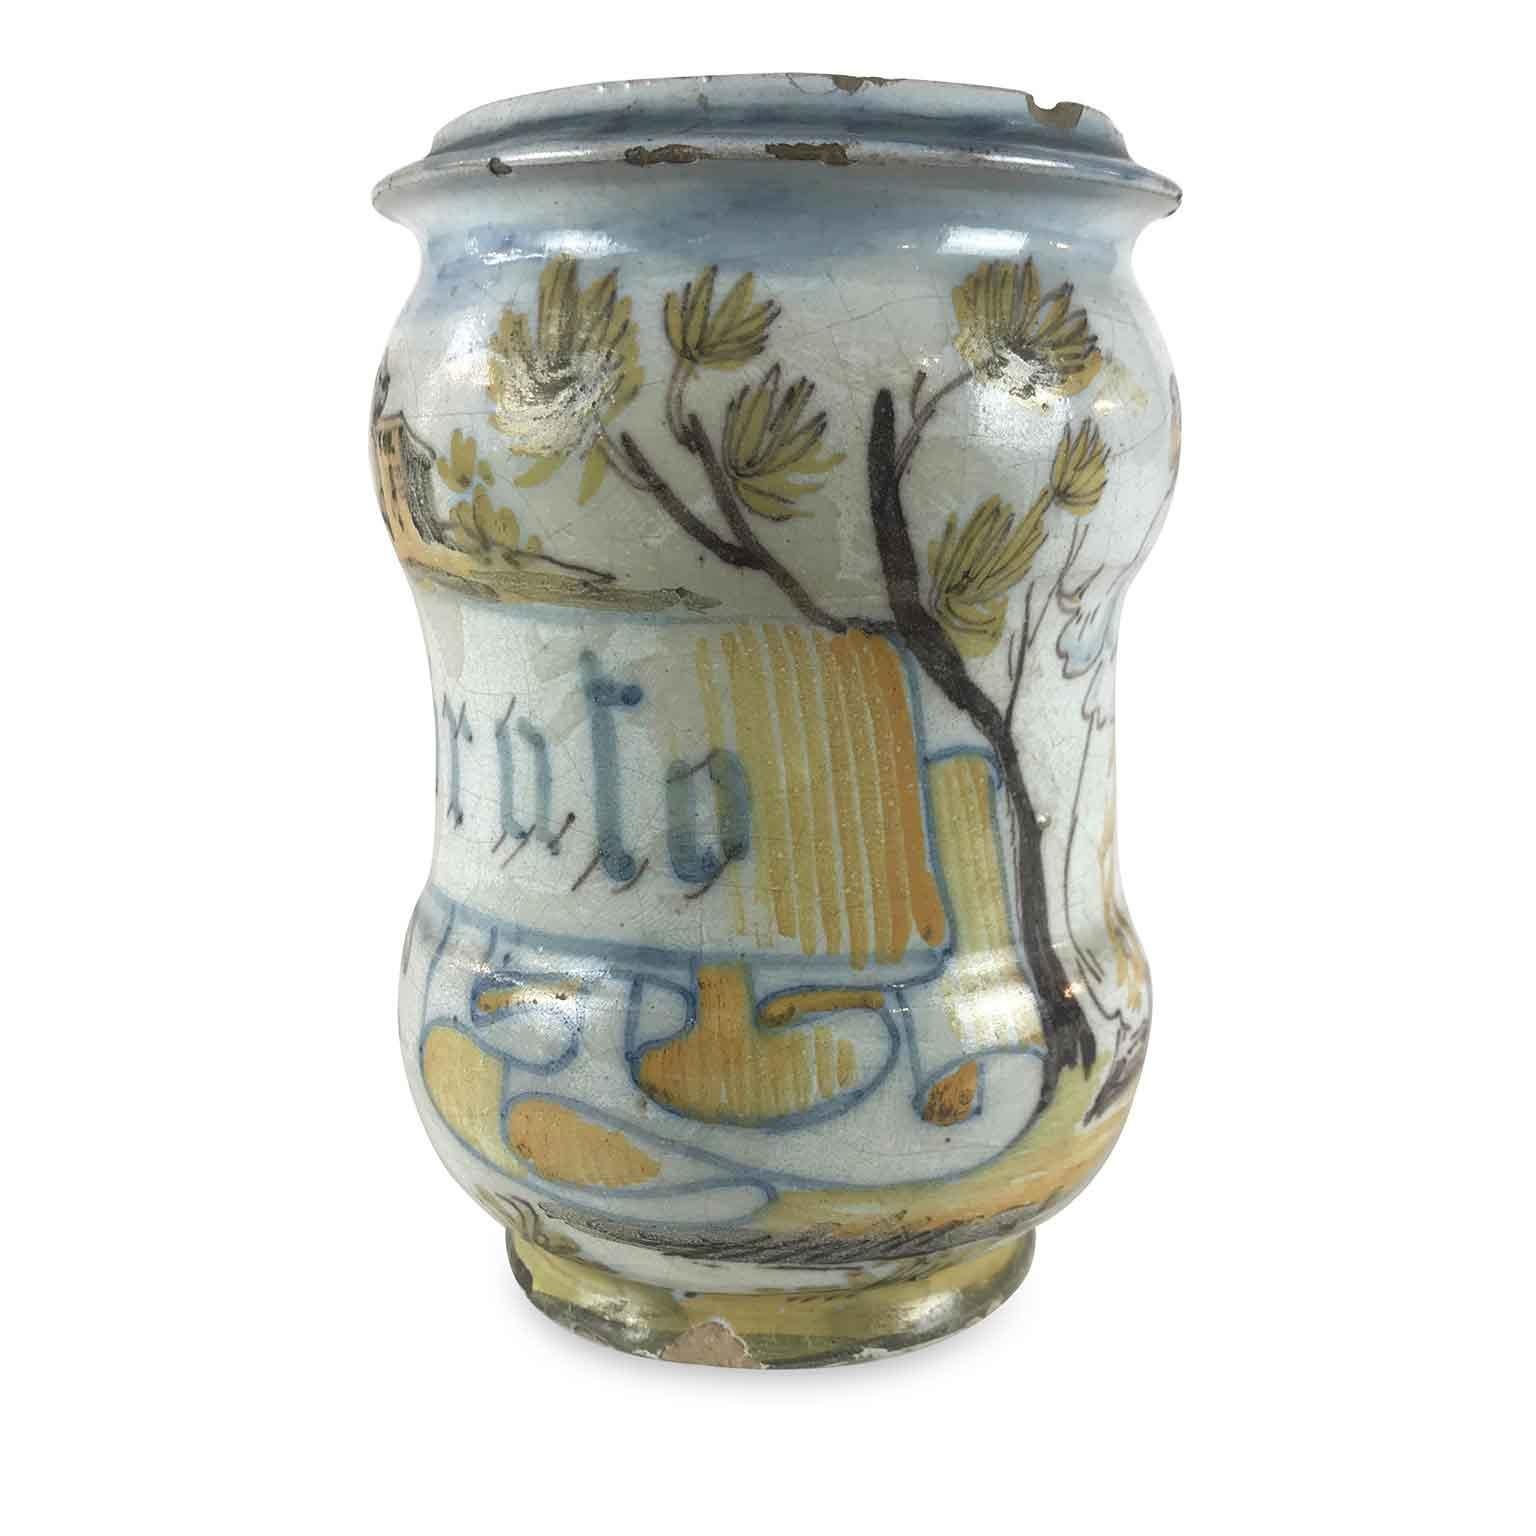 18th Century Italian Majolica Albarello Drug Jar by Jacques Boselly For Sale 5